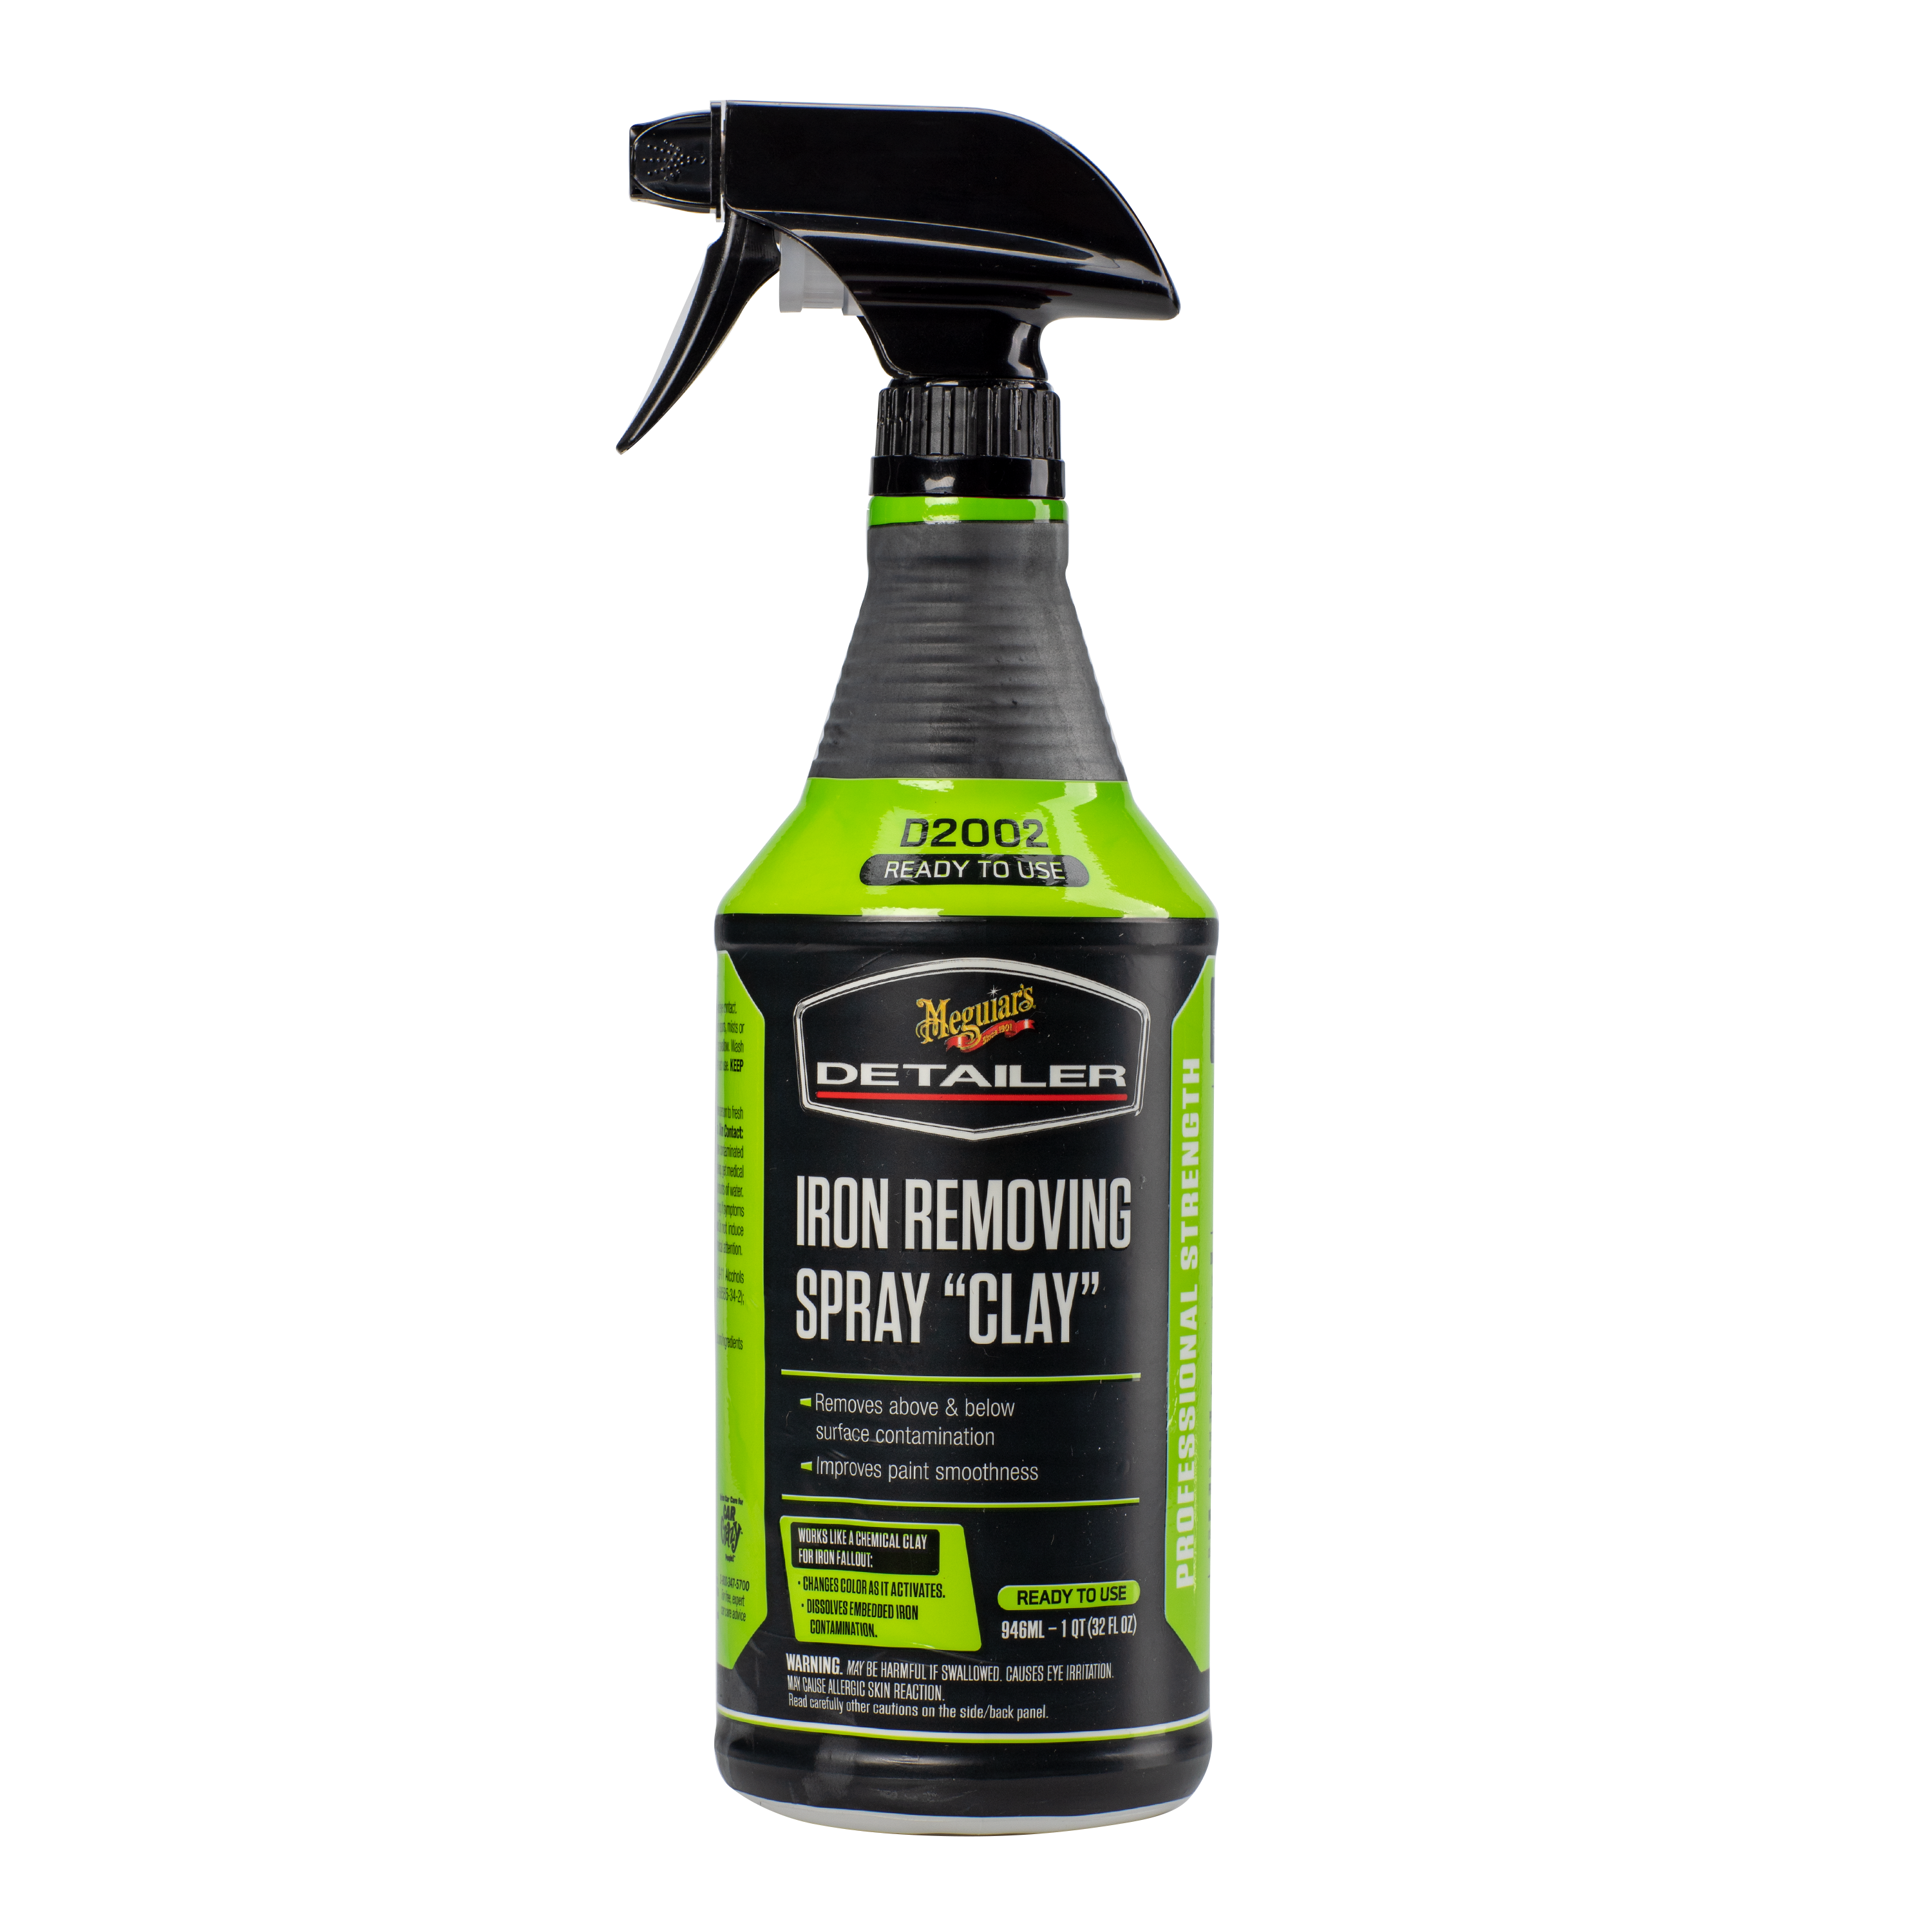 Meguiar's Iron Removing Spray Clay - Industrial Fallout & Iron Remover  without Abrasives - DRTU200232, 32 oz